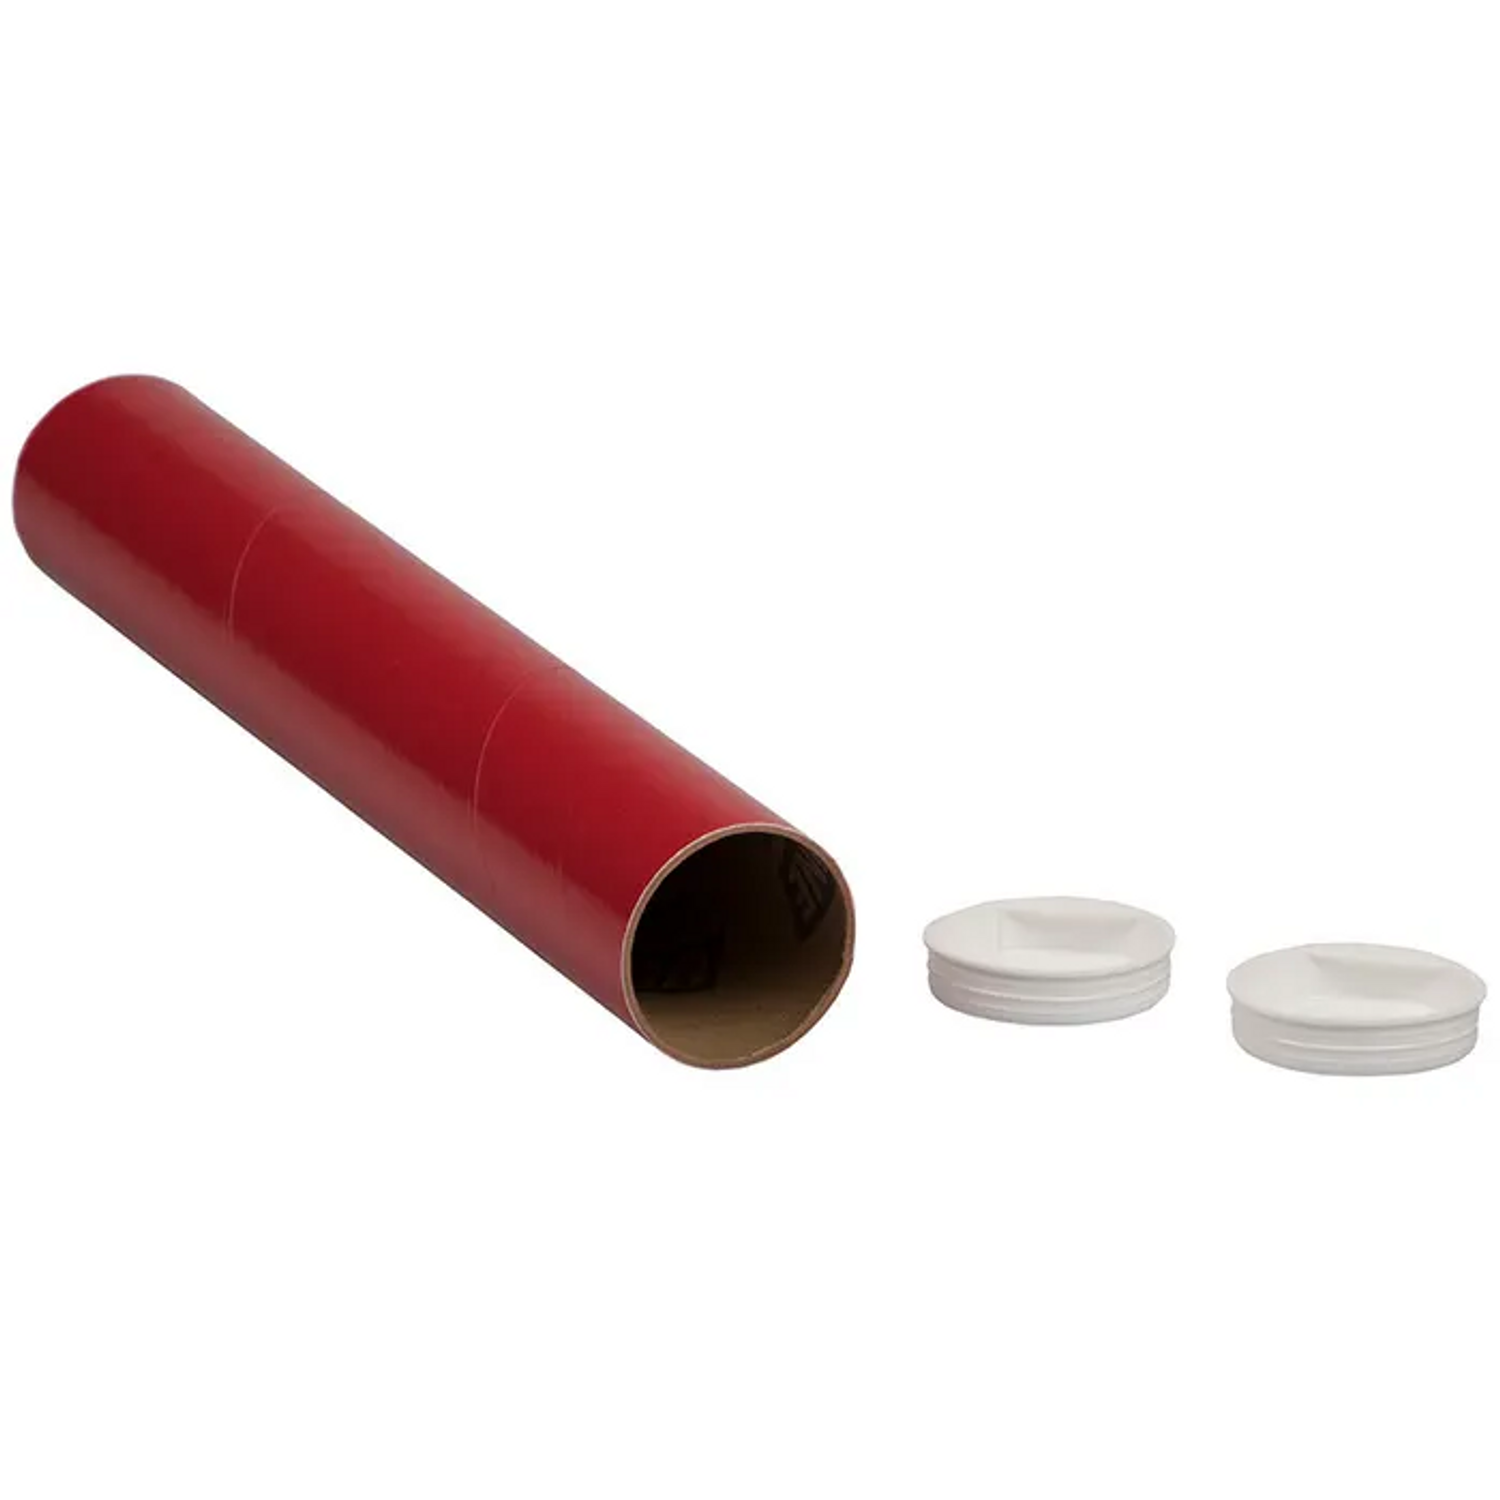 Long Cardboard Document Art Roll Shipping Poster Tubes Storage Packaging For Mailing Postal Tube With Caps